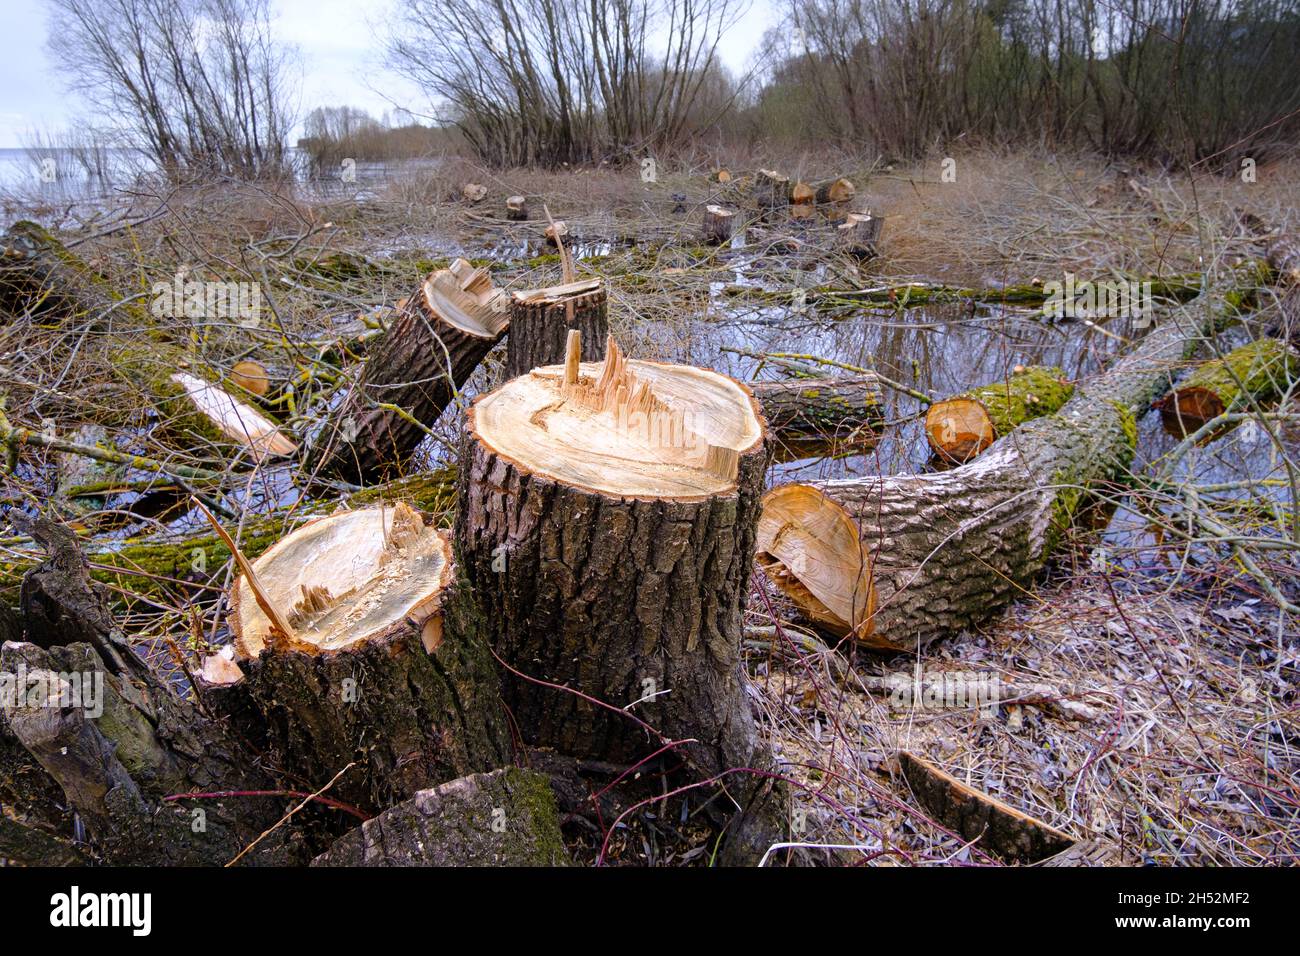 Stumps and felled trees. The problem of deforestation. Environmental concerns. Stock Photo